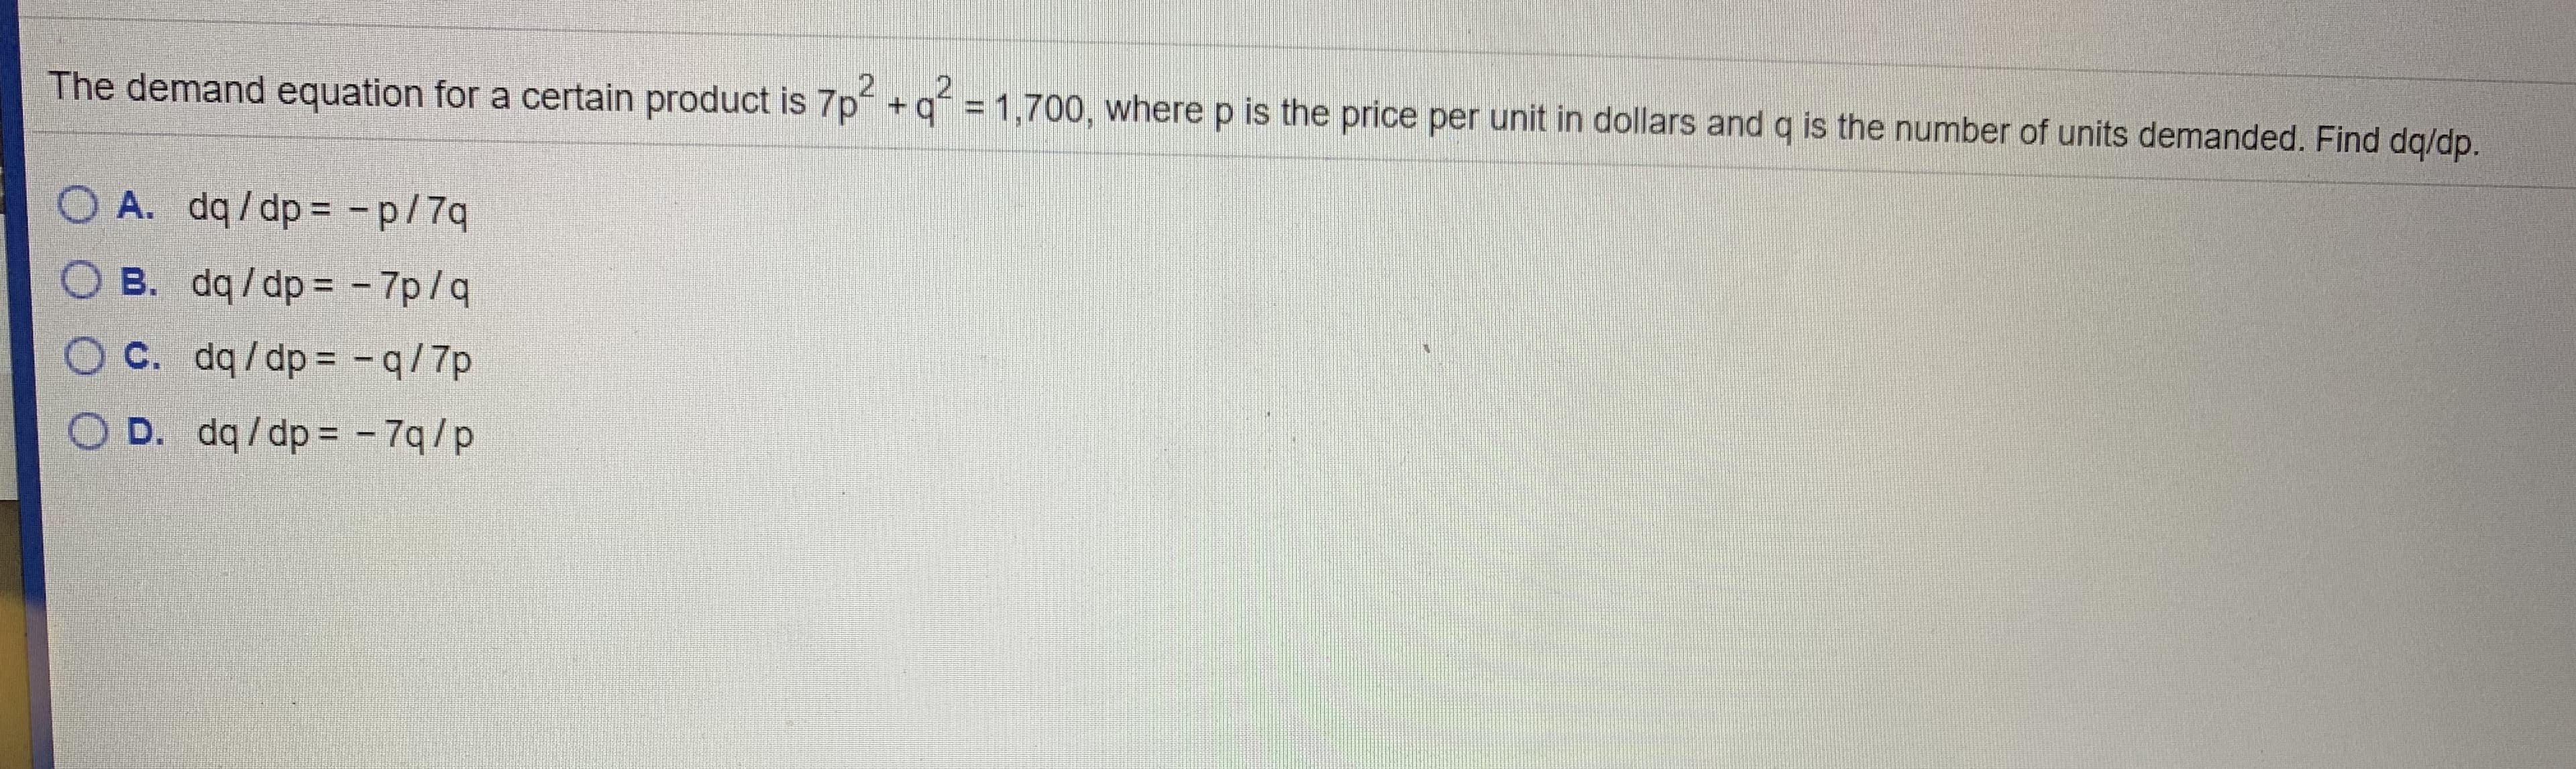 The demand equation for a certain product is 7p +g = 1,700, where p is the price per unit in dollars and q is the number of units demanded. Find dg/dp.
A. dq/dp = -p/7q
B. dq /dp = - 7p/q
C. dq/dp = - q/7p
D. dq/dp = - 7q/p
